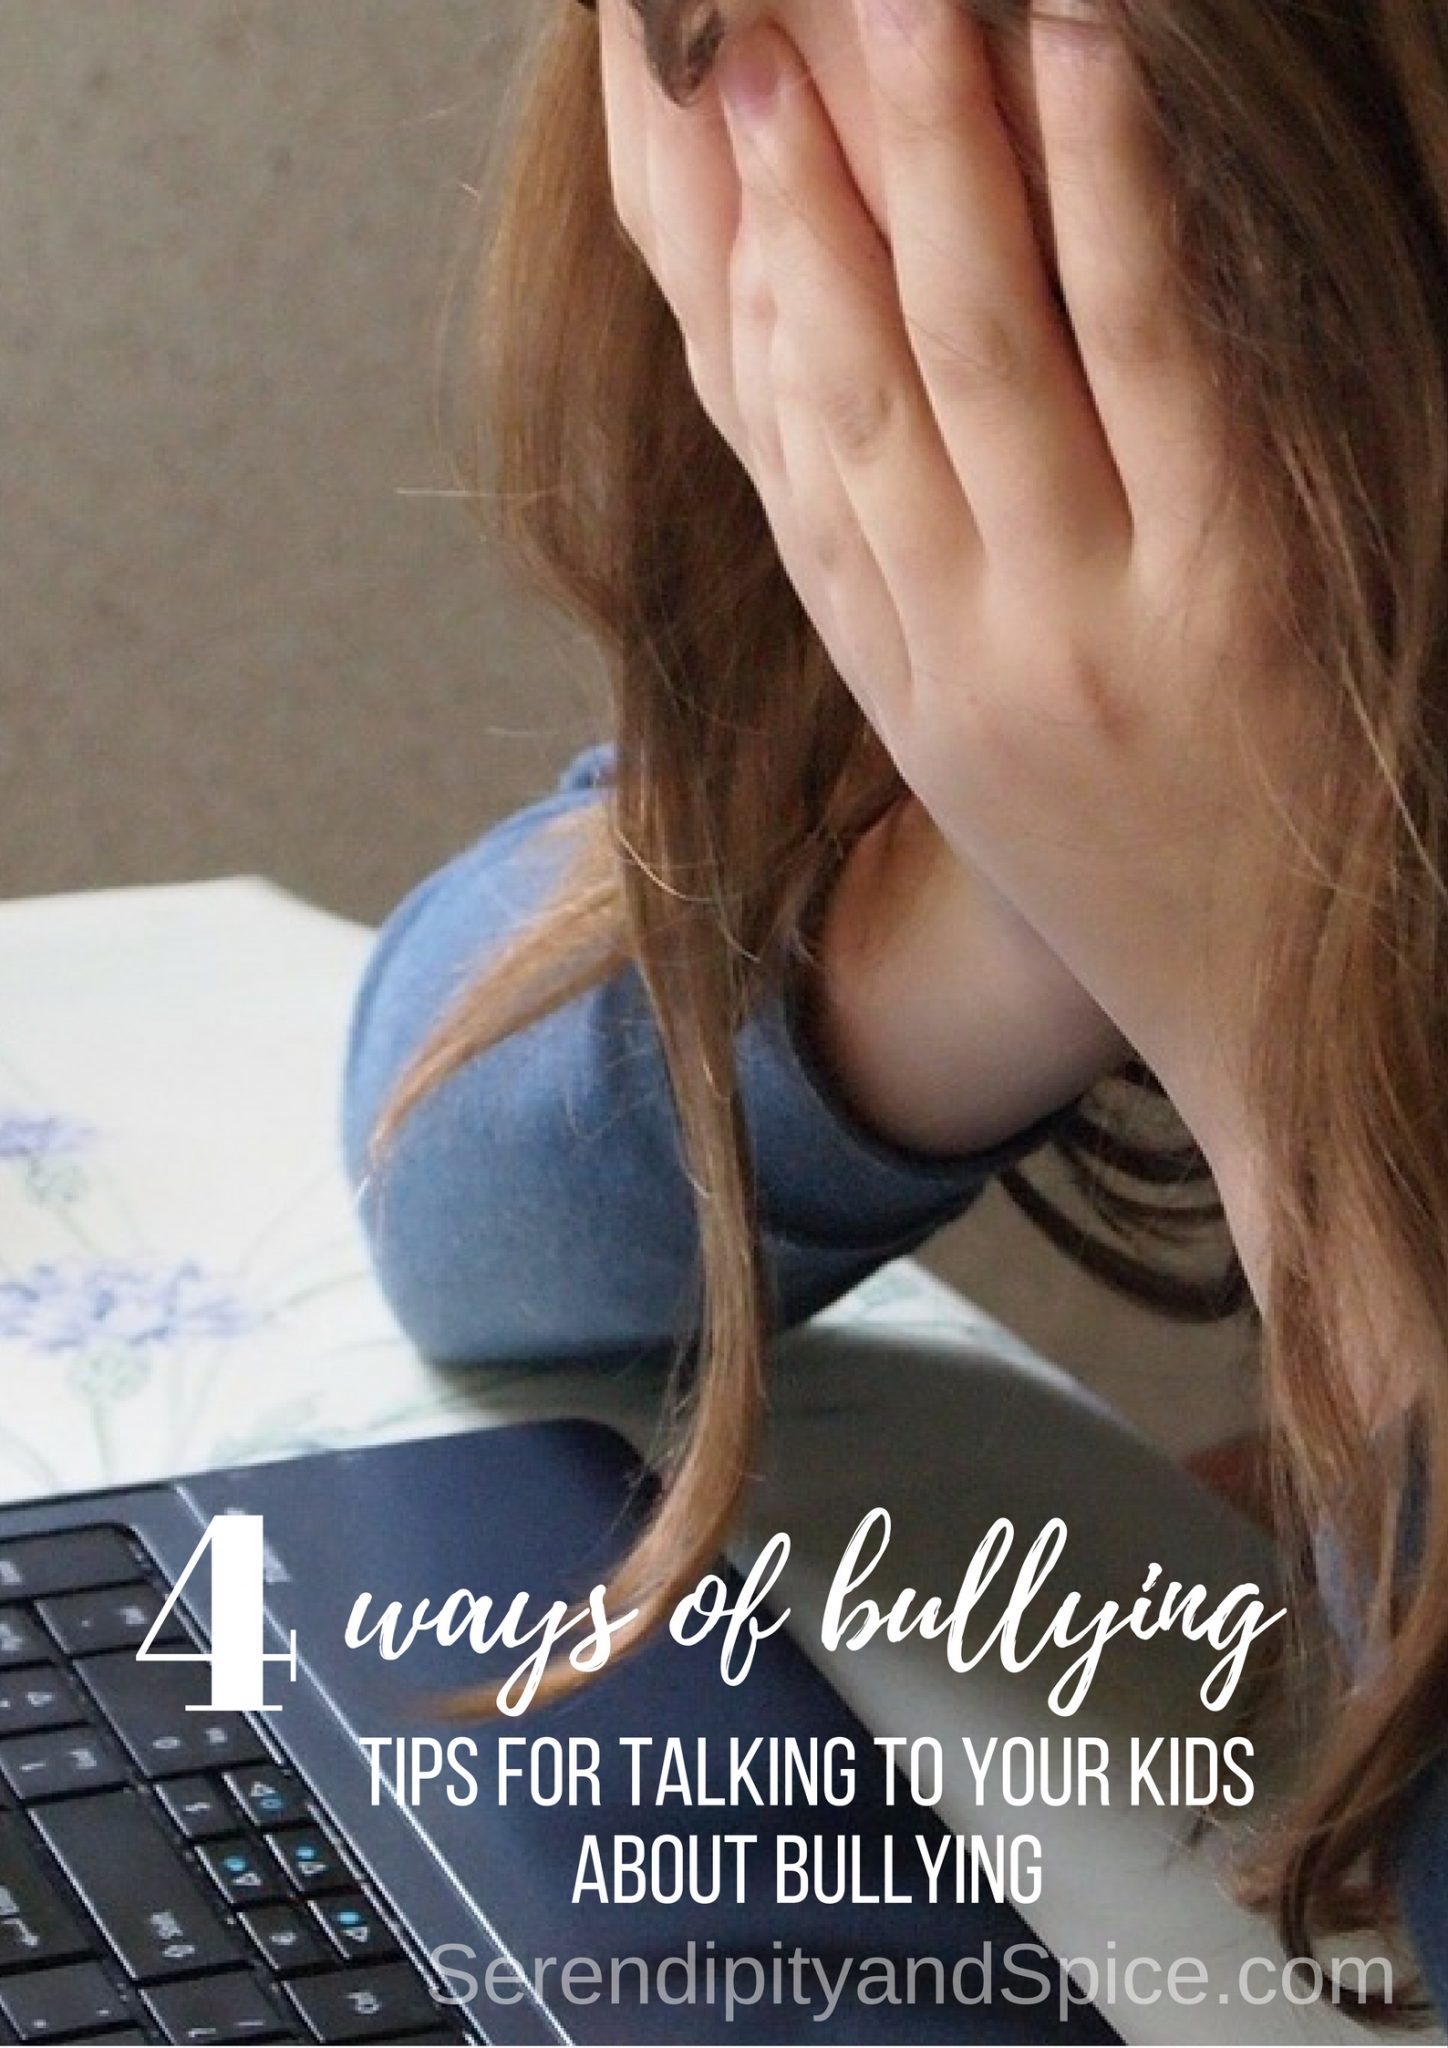 Teaching Your Kids About Bullying